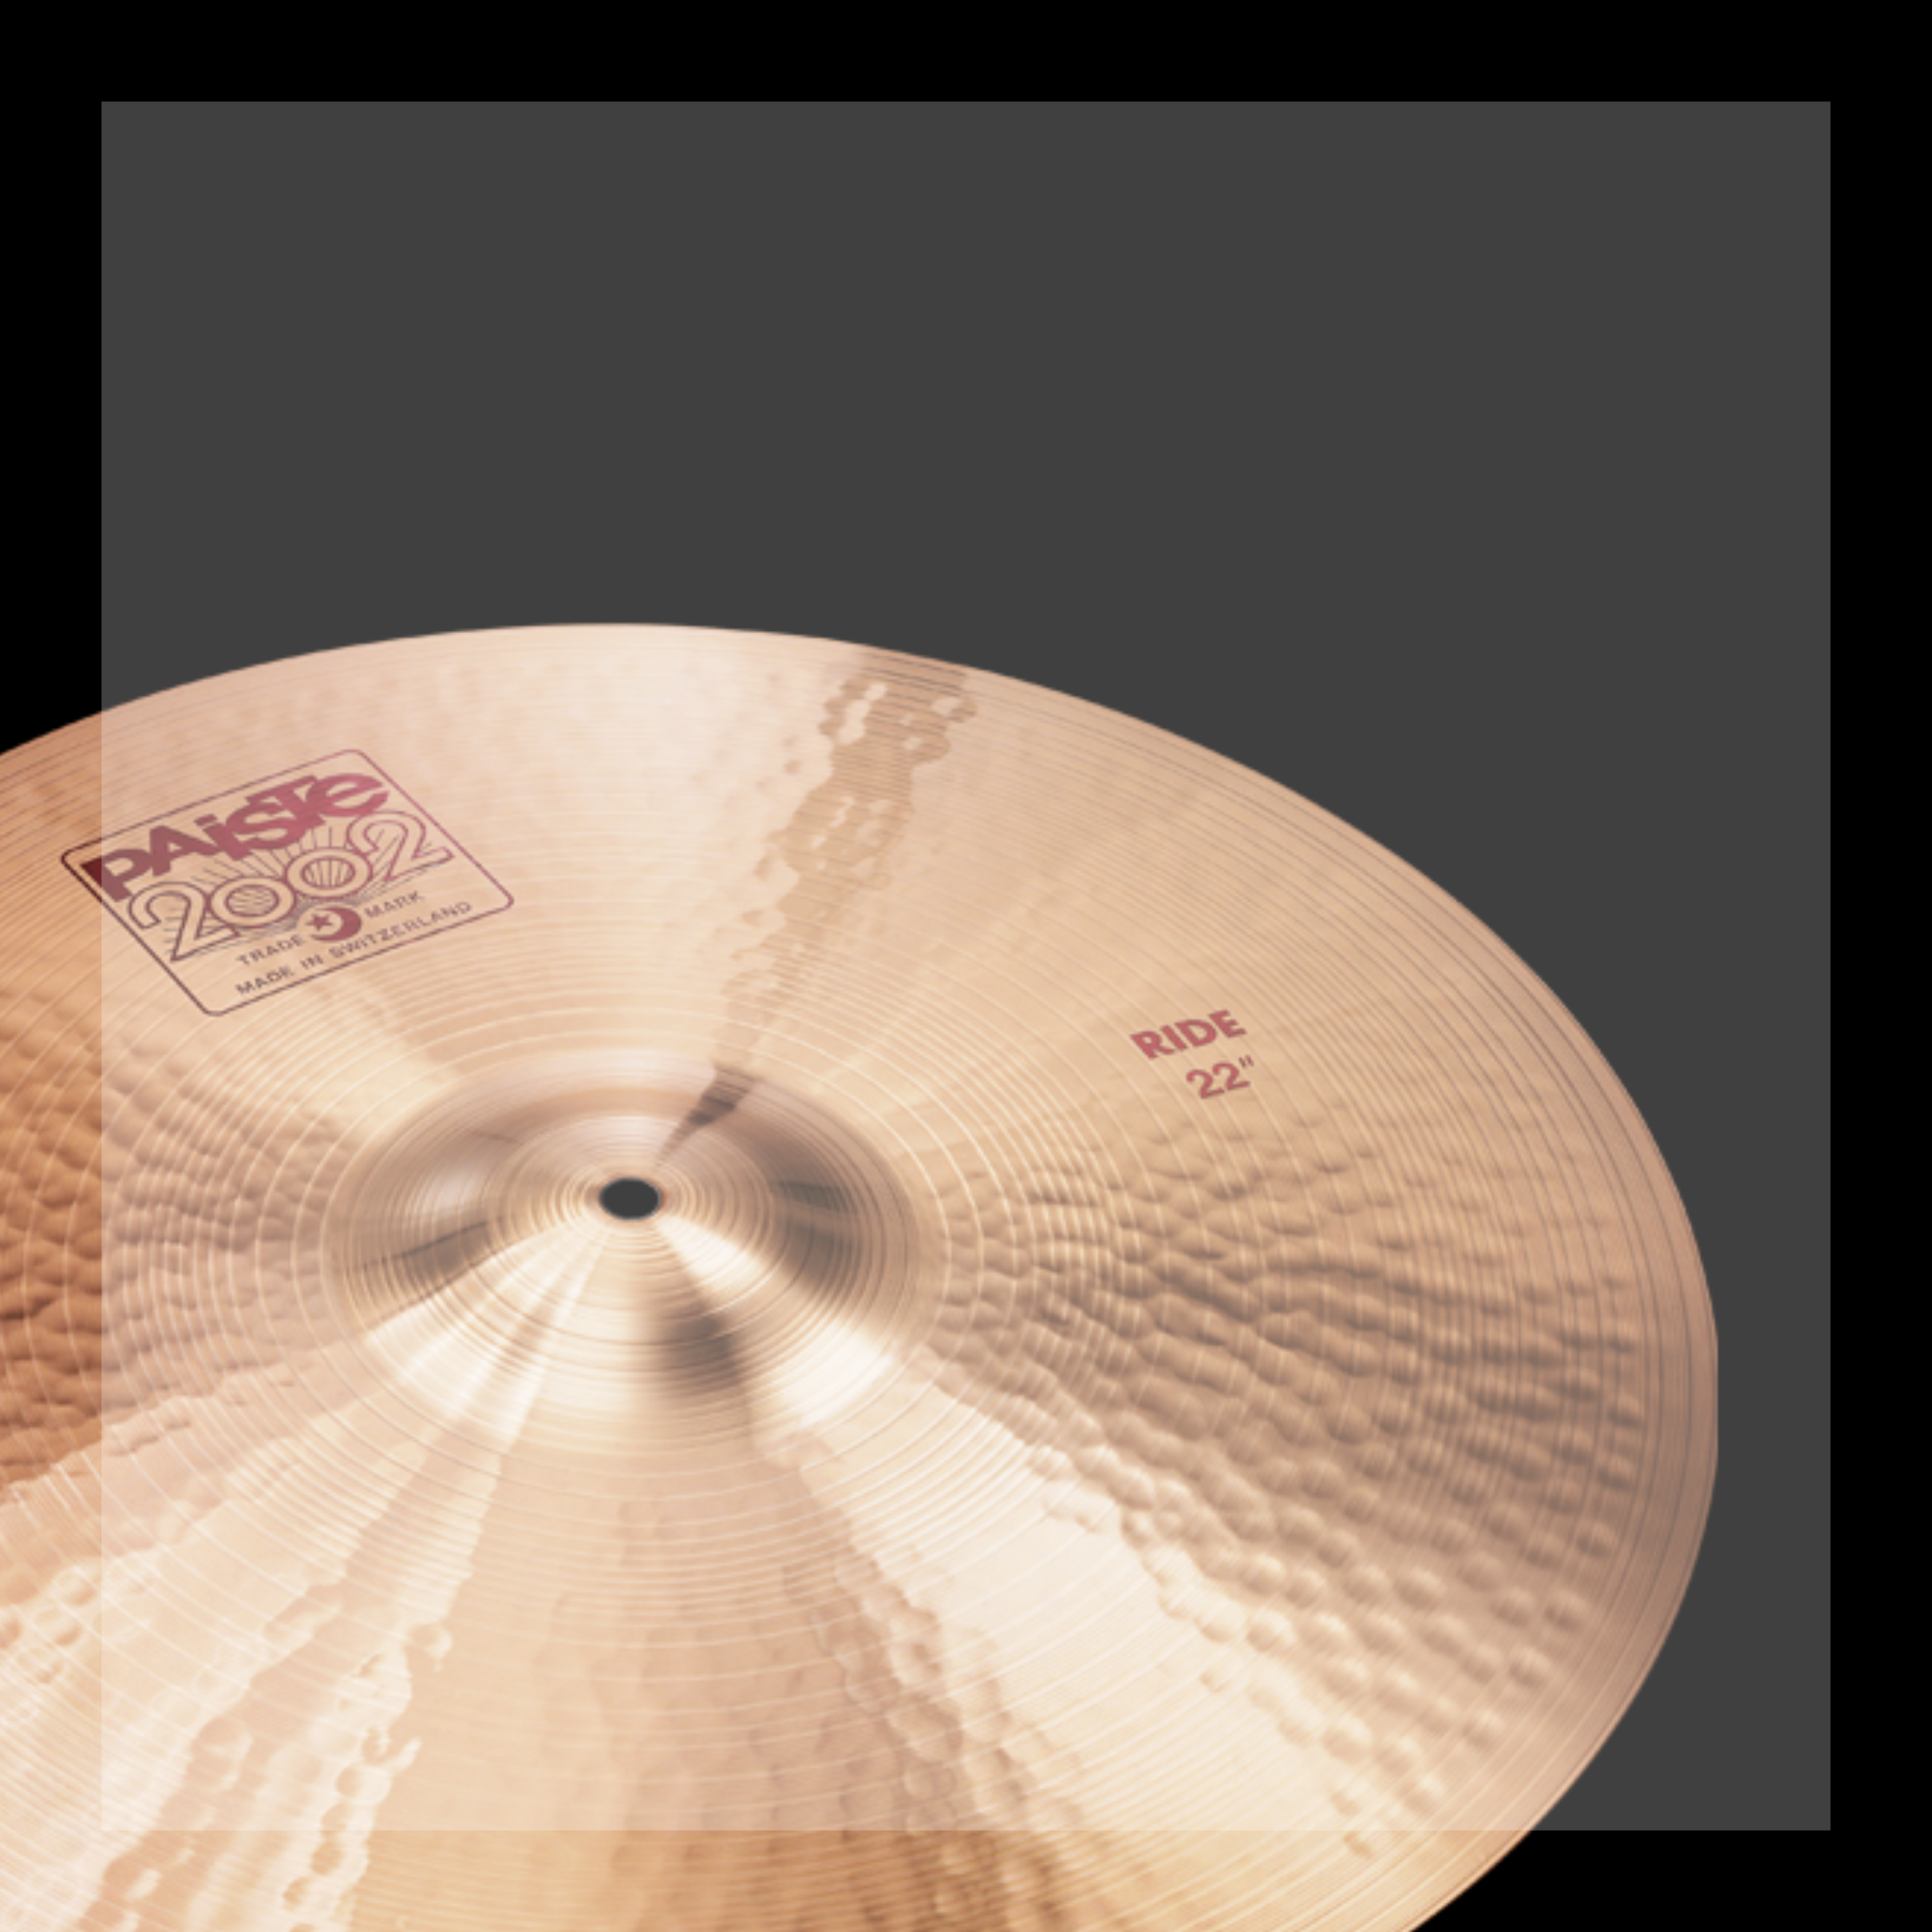 Shop Paiste 2002 Cymbals At Into Music - Drum Store – Into Music Store